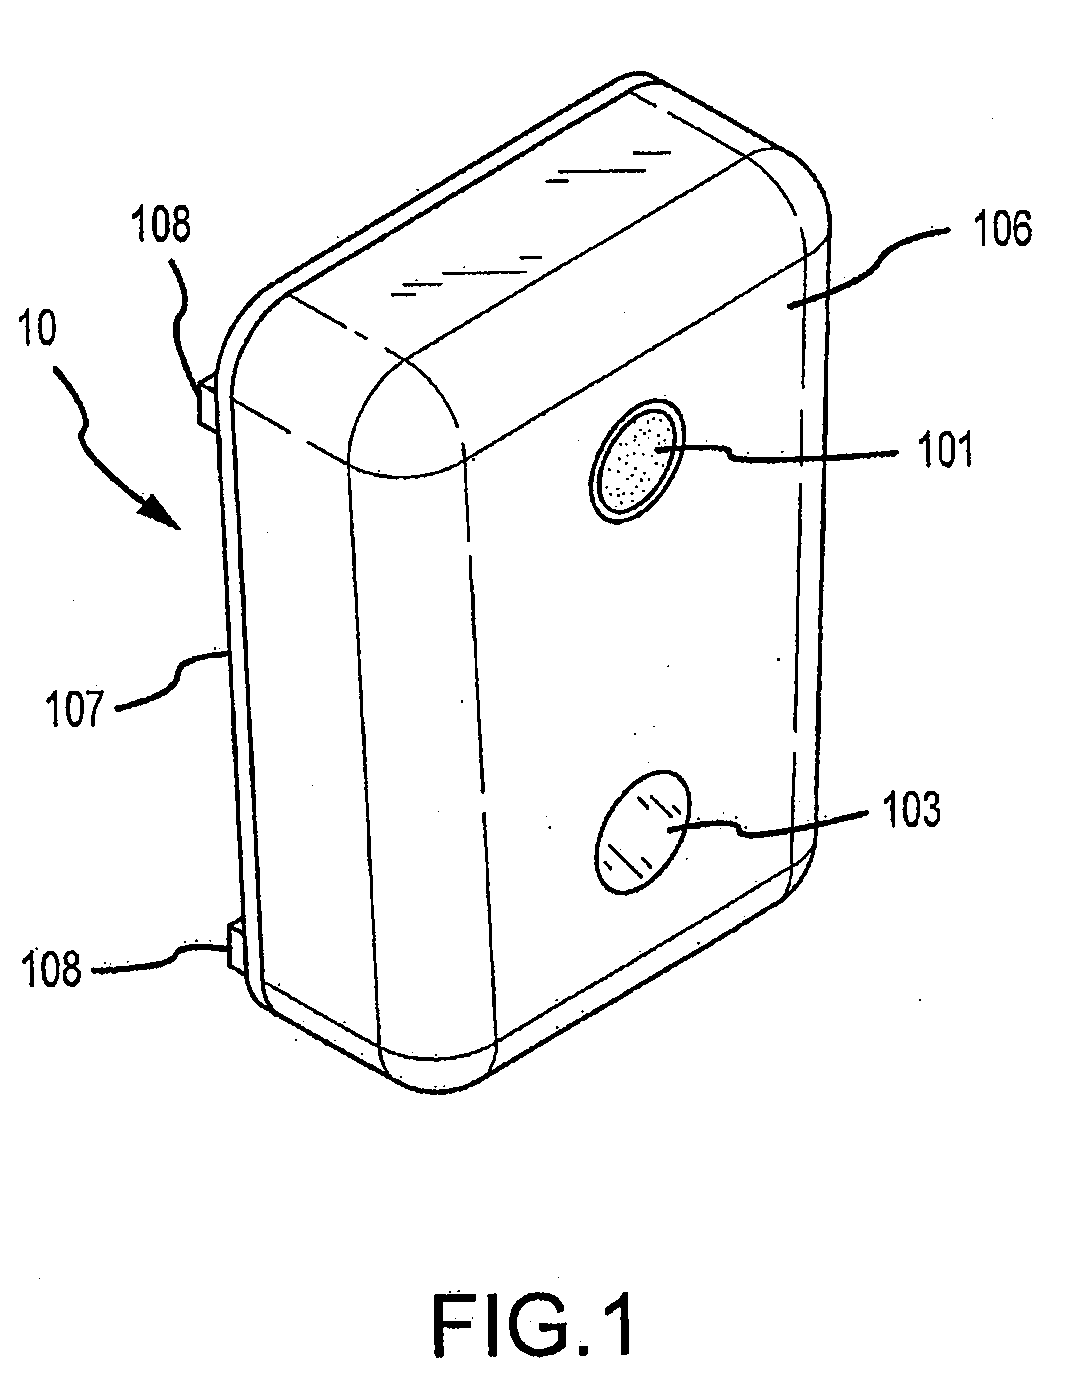 Apparatus and methods for treating fabrics in a laundry dryer